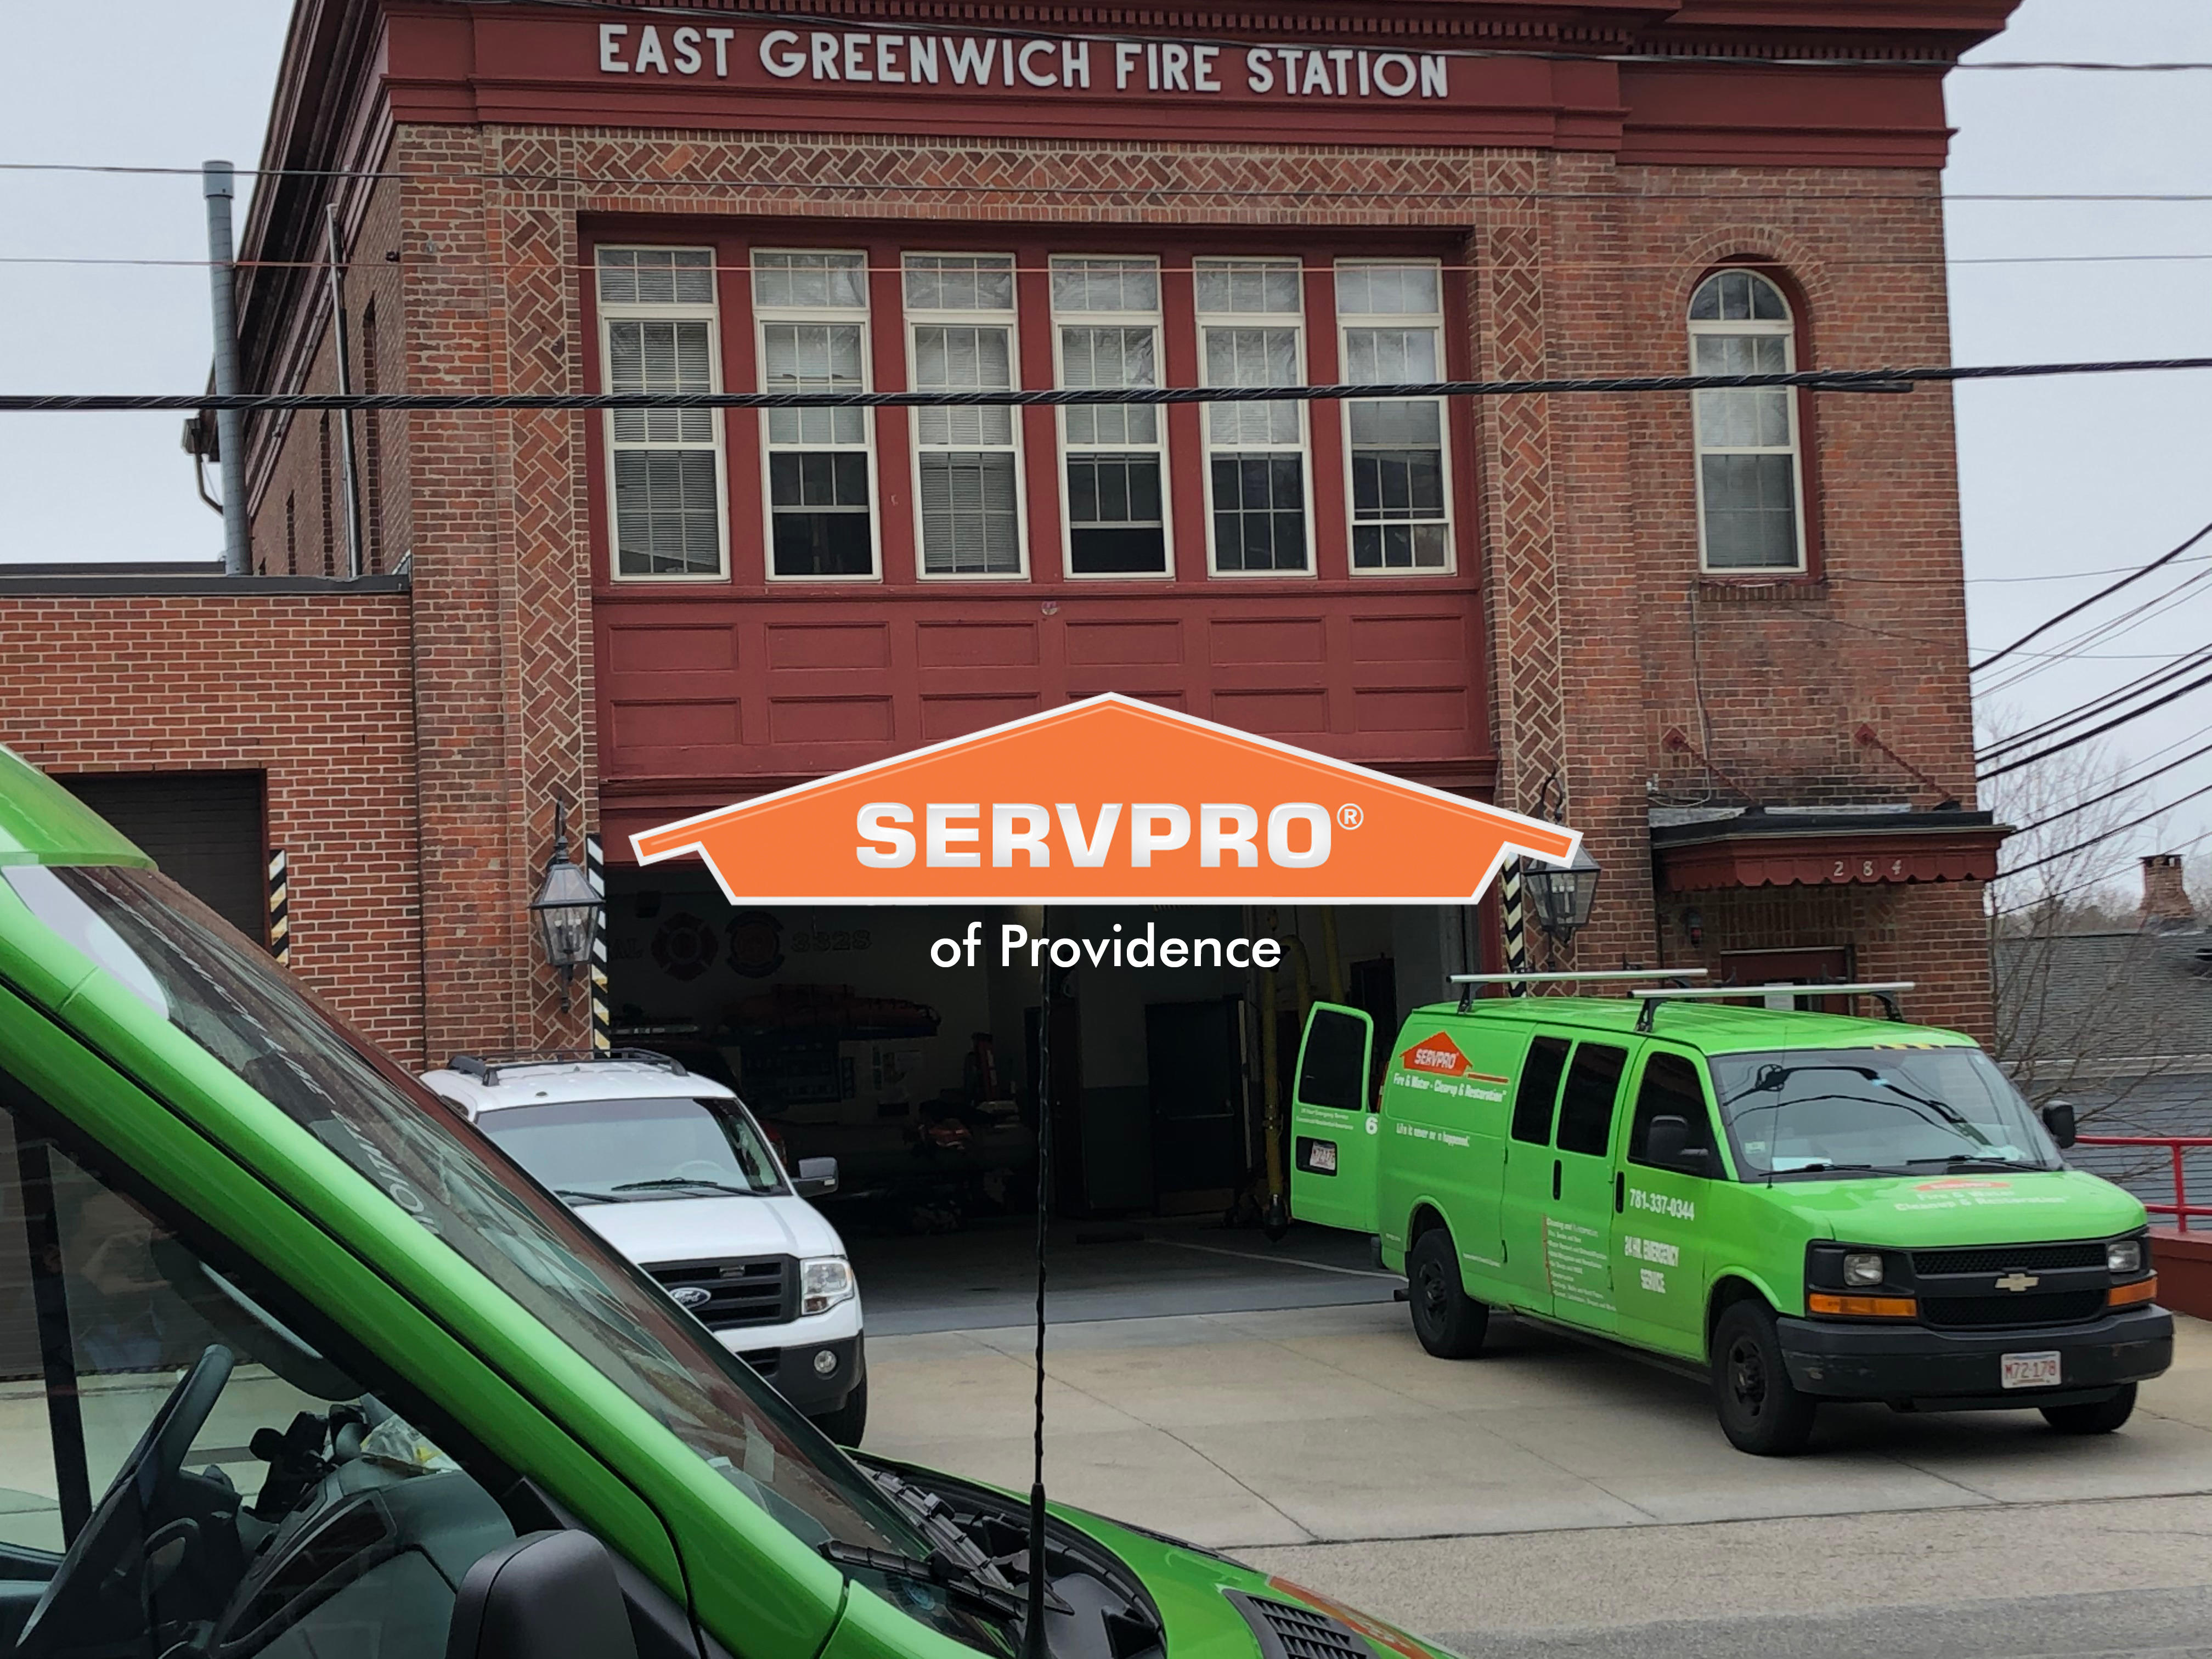 SERVPRO of Providence is locally owned and operated. We are proud to serve our local communities.